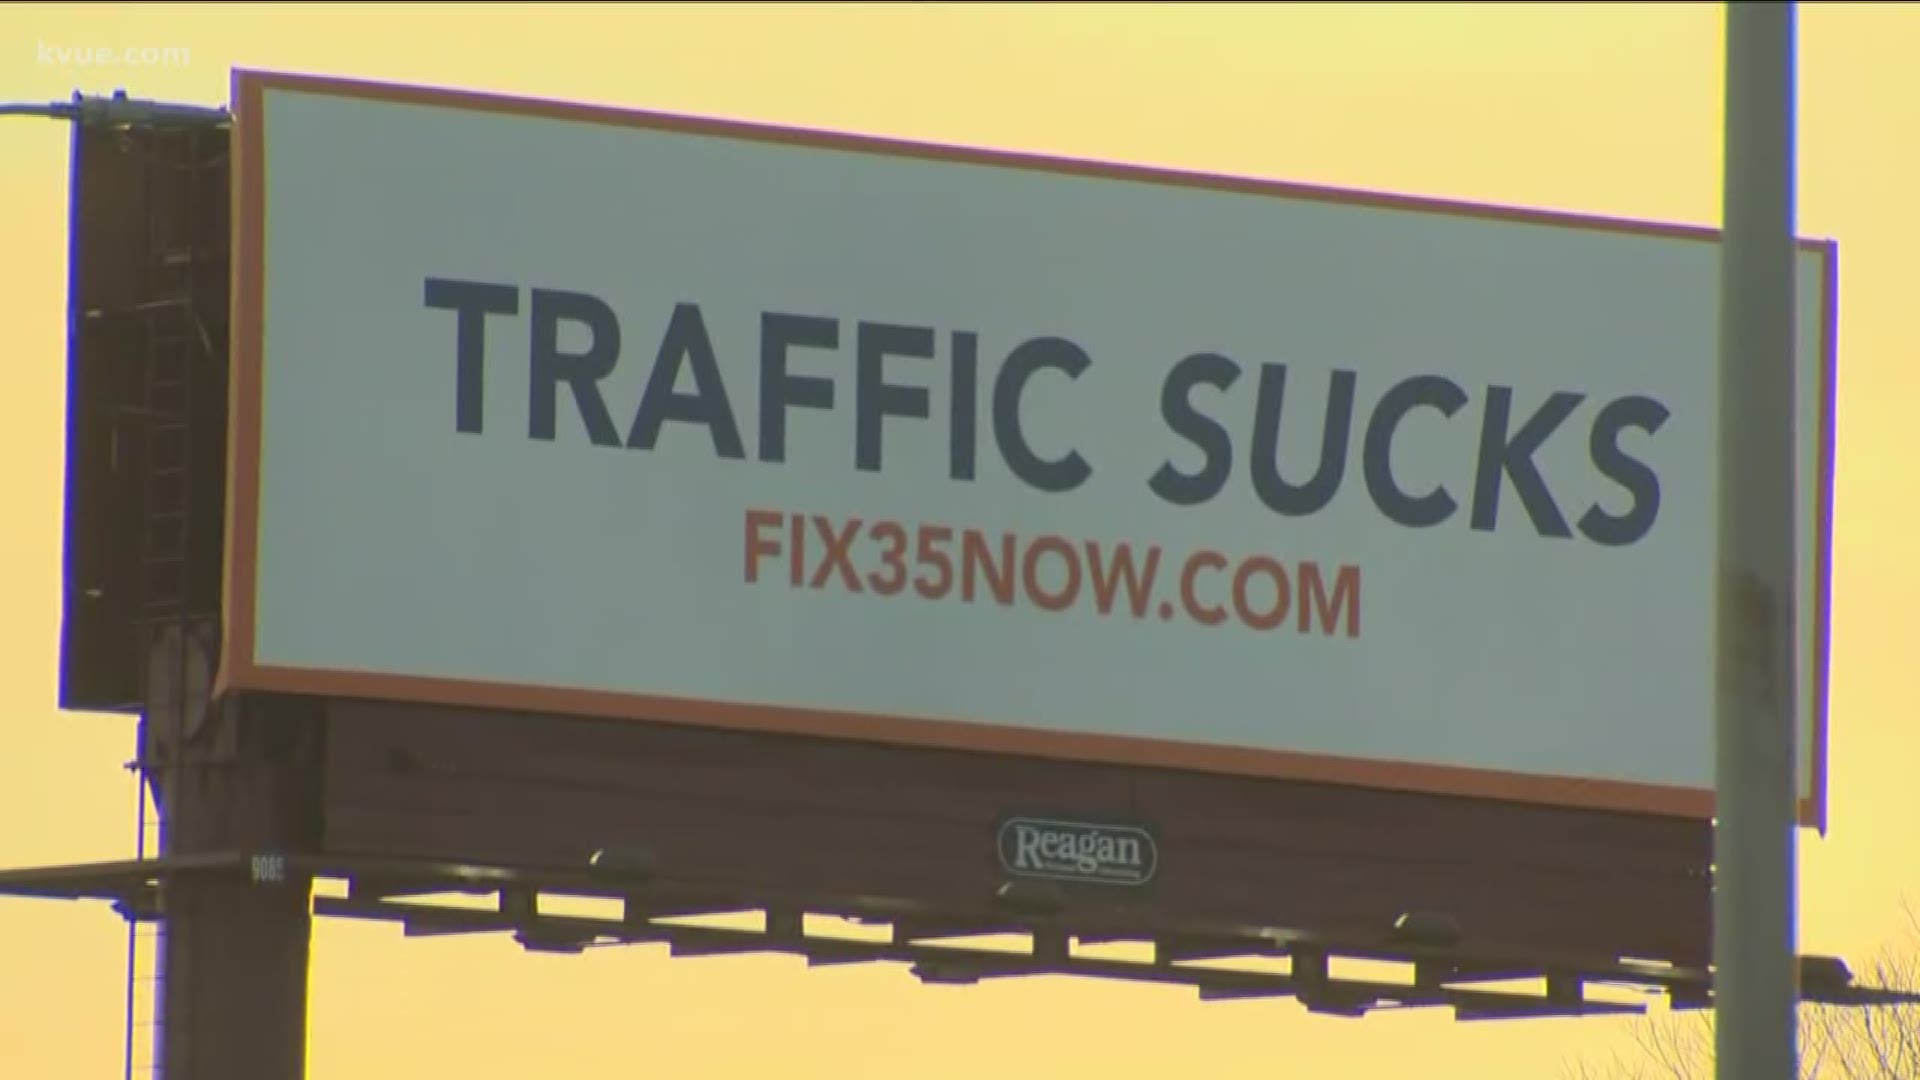 I-35 in Austin is the third most congested highway in Texas. Now, right above that traffic, is a billboard that's catching people's attention.